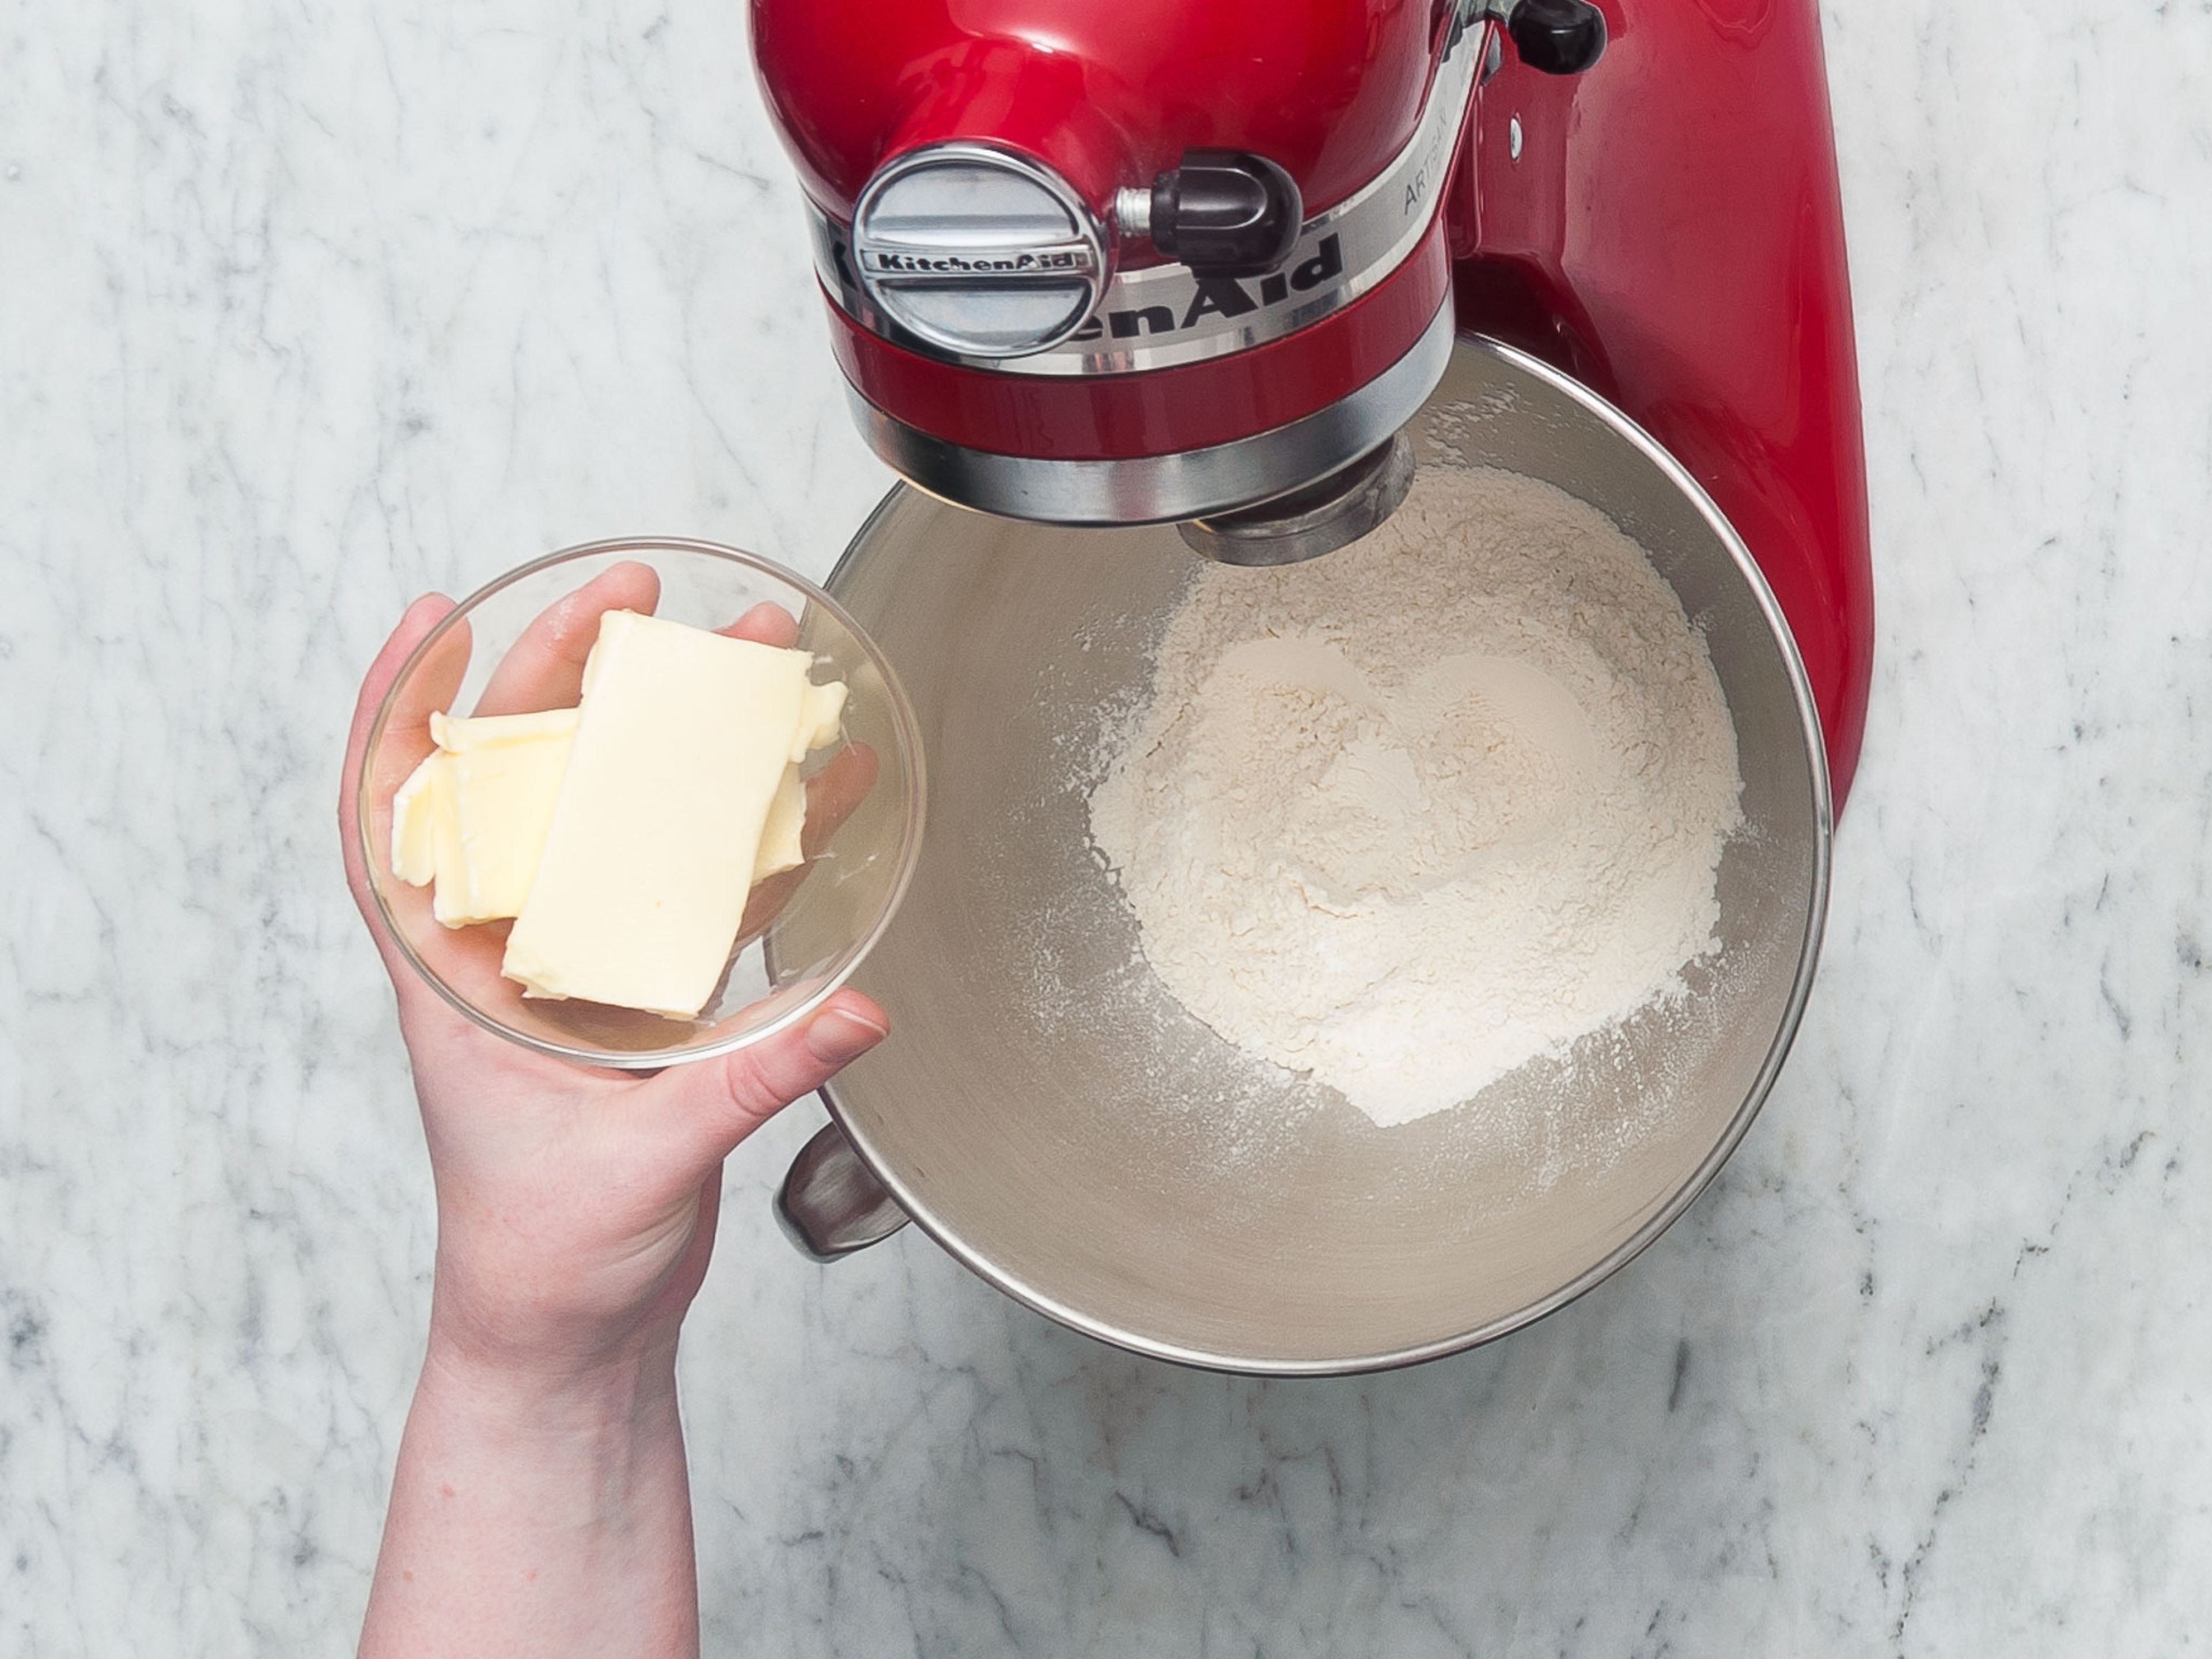 Mix flour and baking powder together in a mixing bowl or the bowl of stand mixer. Add butter and stir to combine until a crumbly dough forms.